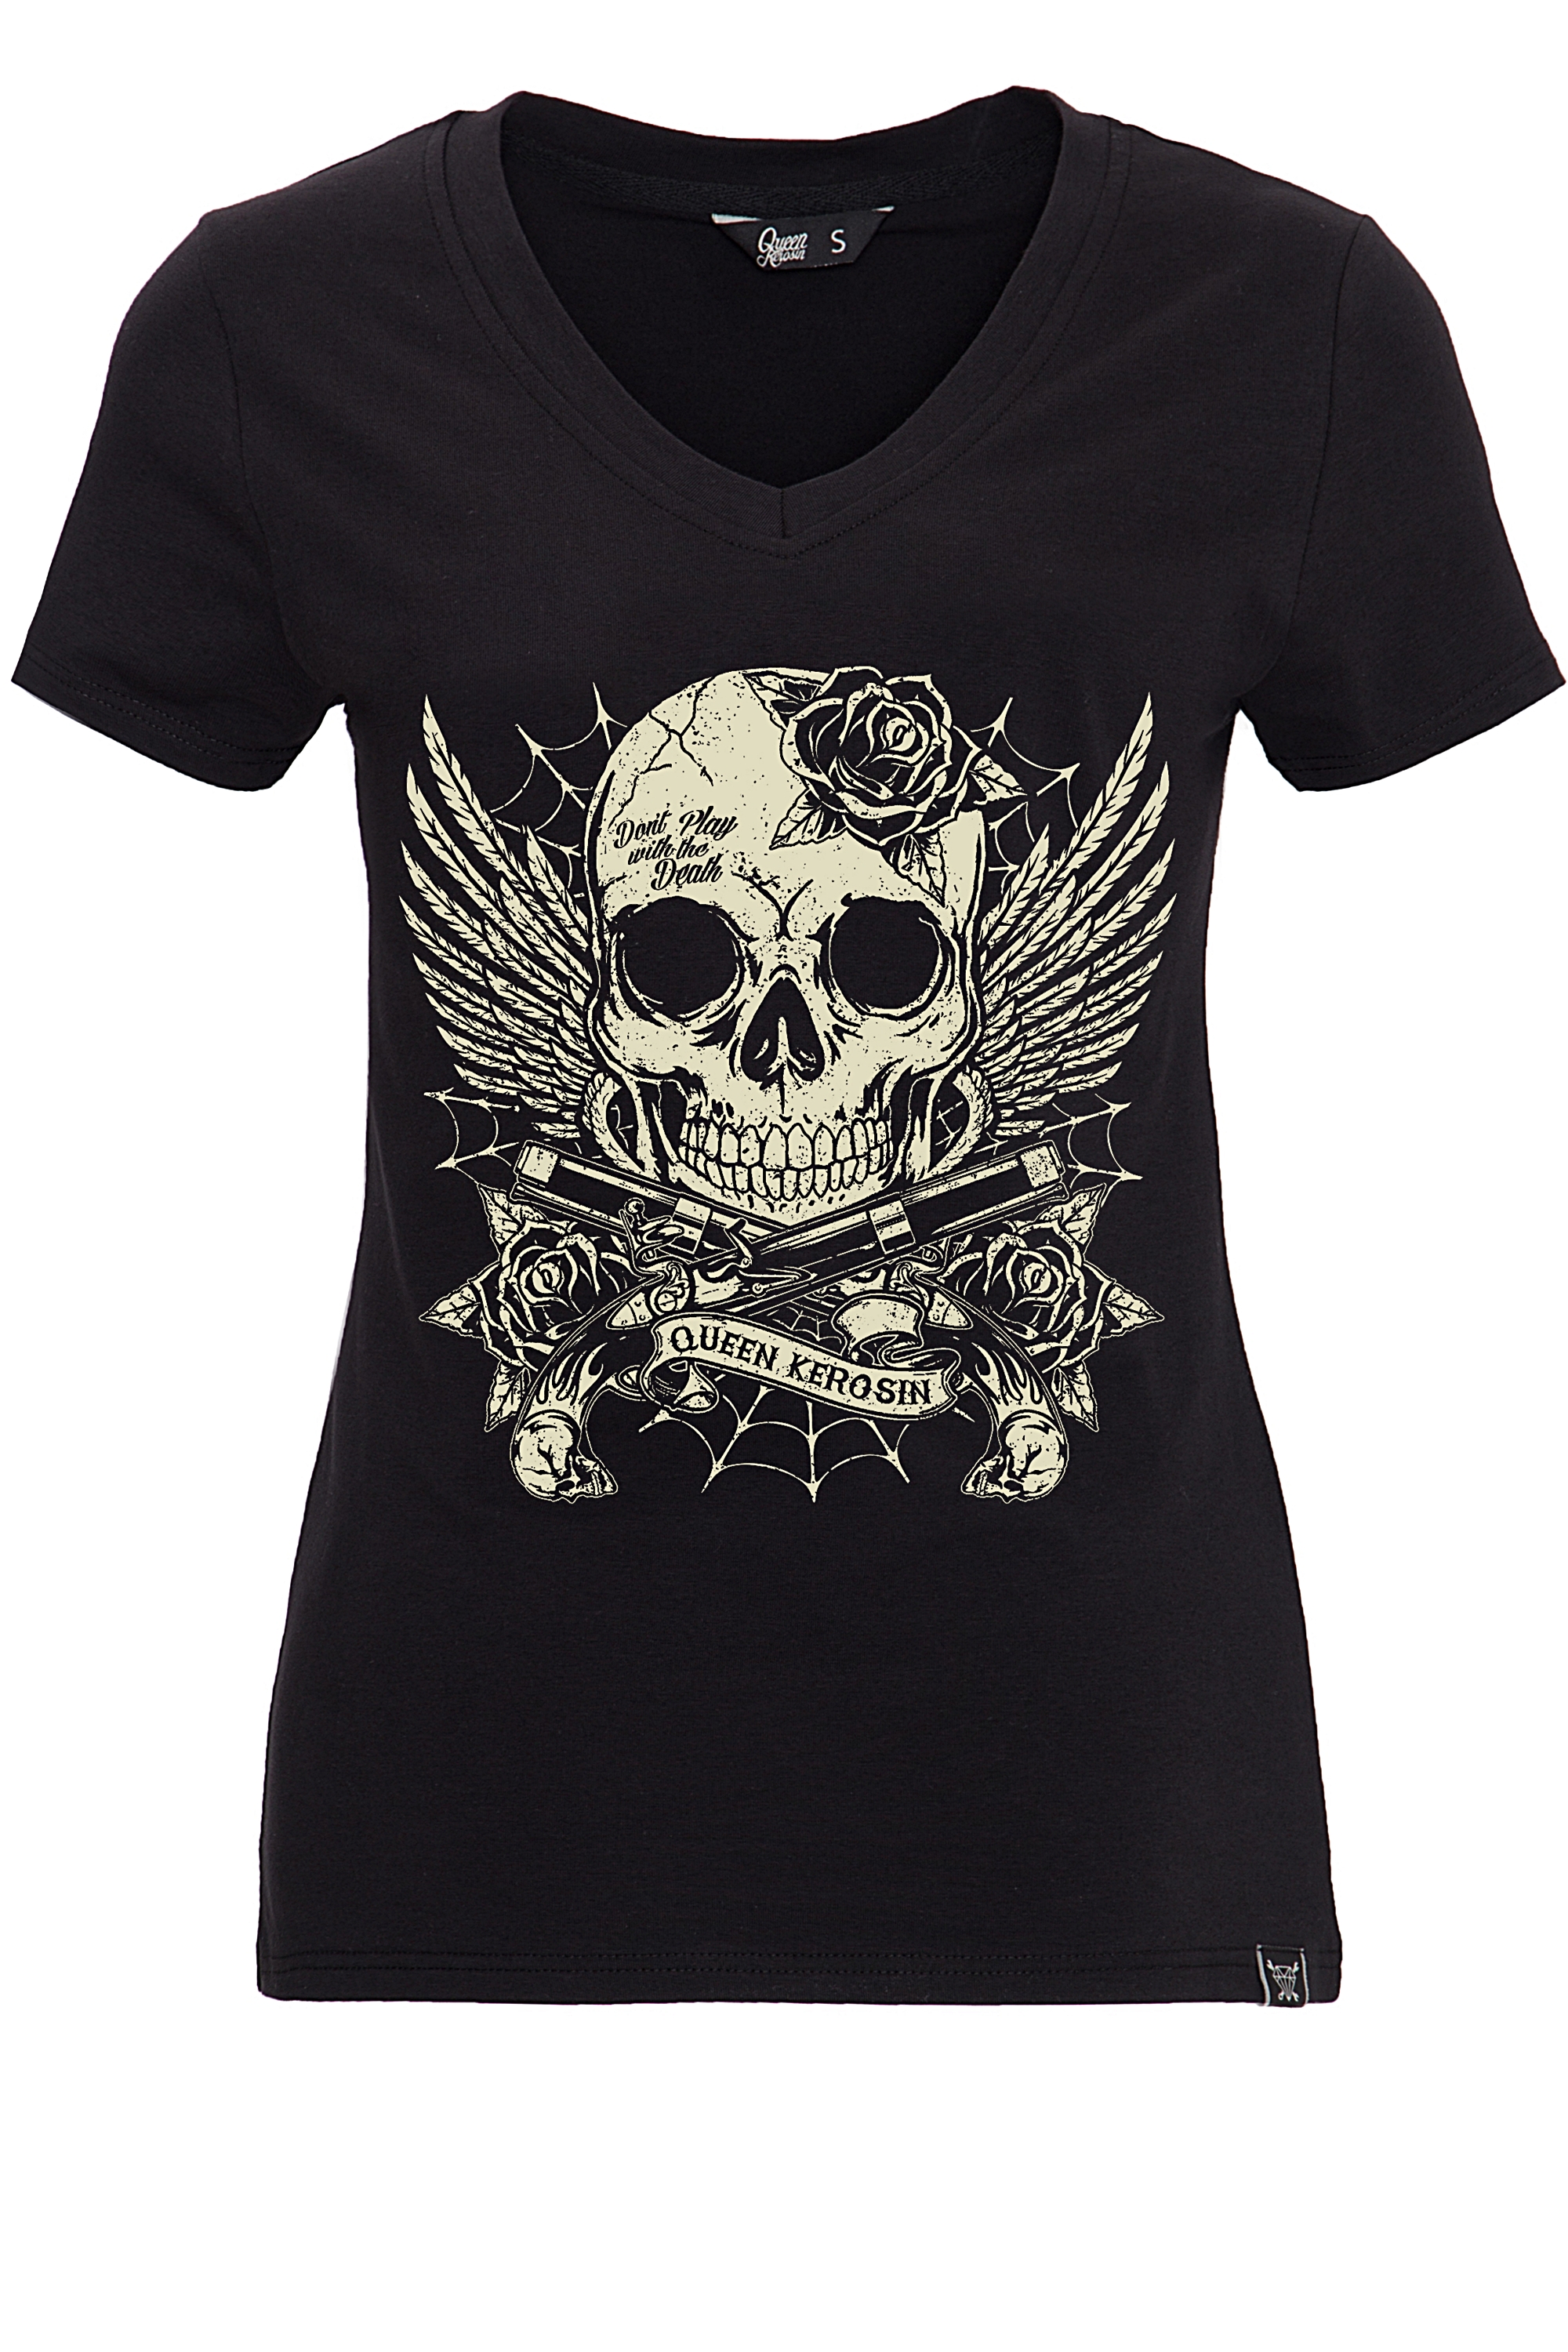 Queen Kerosin T-Shirt - Don´t Play With The Death M